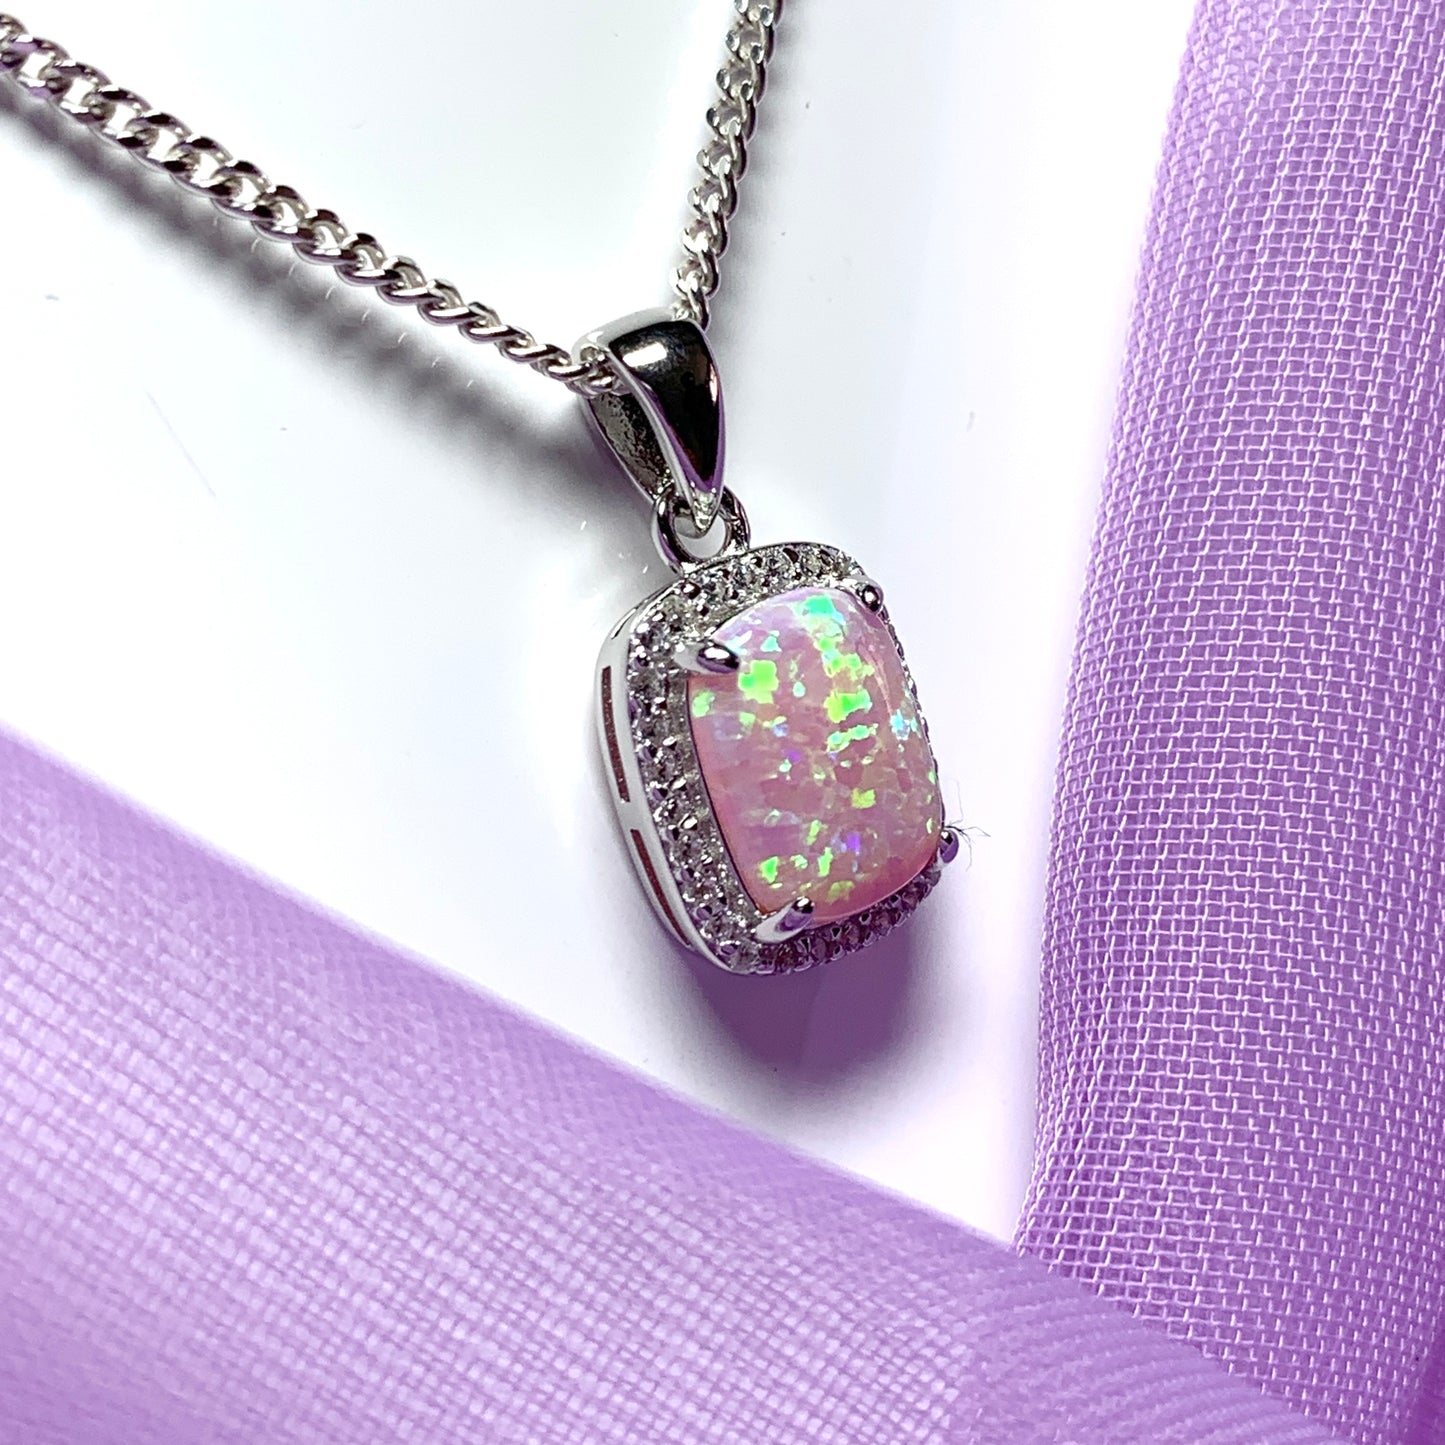 Pink opal necklace square sterling silver and cubic zirconia pendant